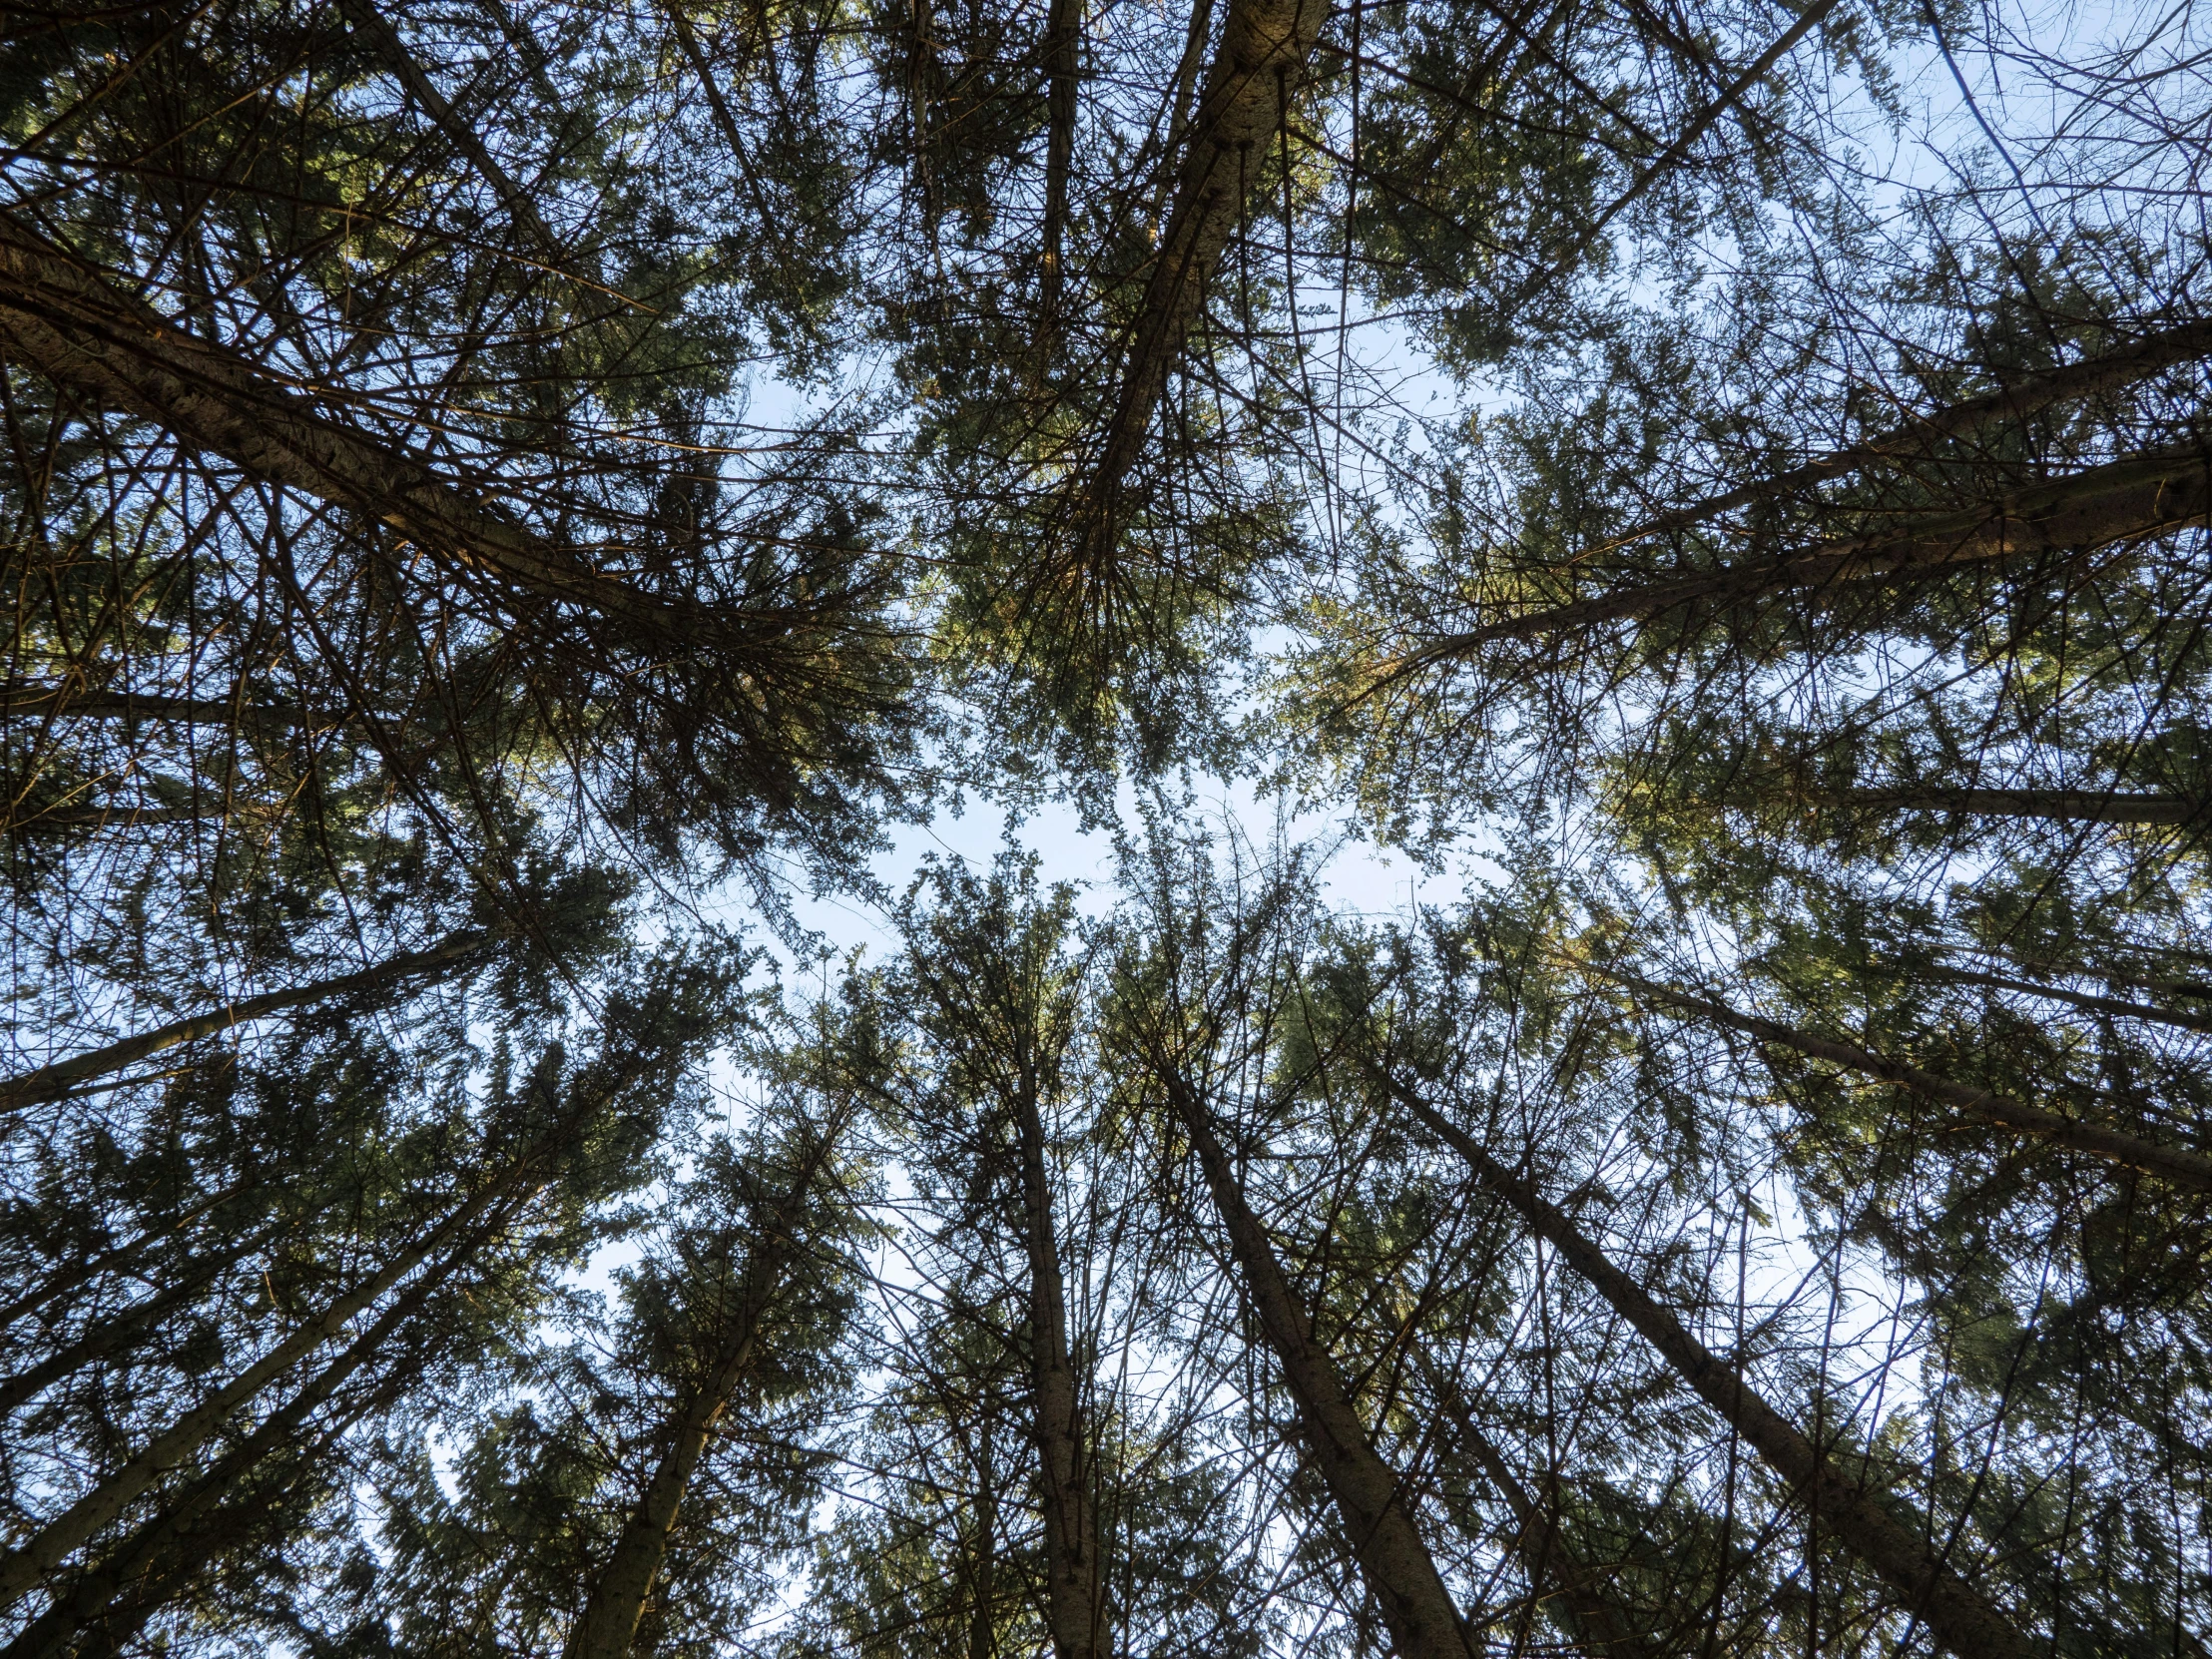 the top portion of a pine tree looking up at the tops